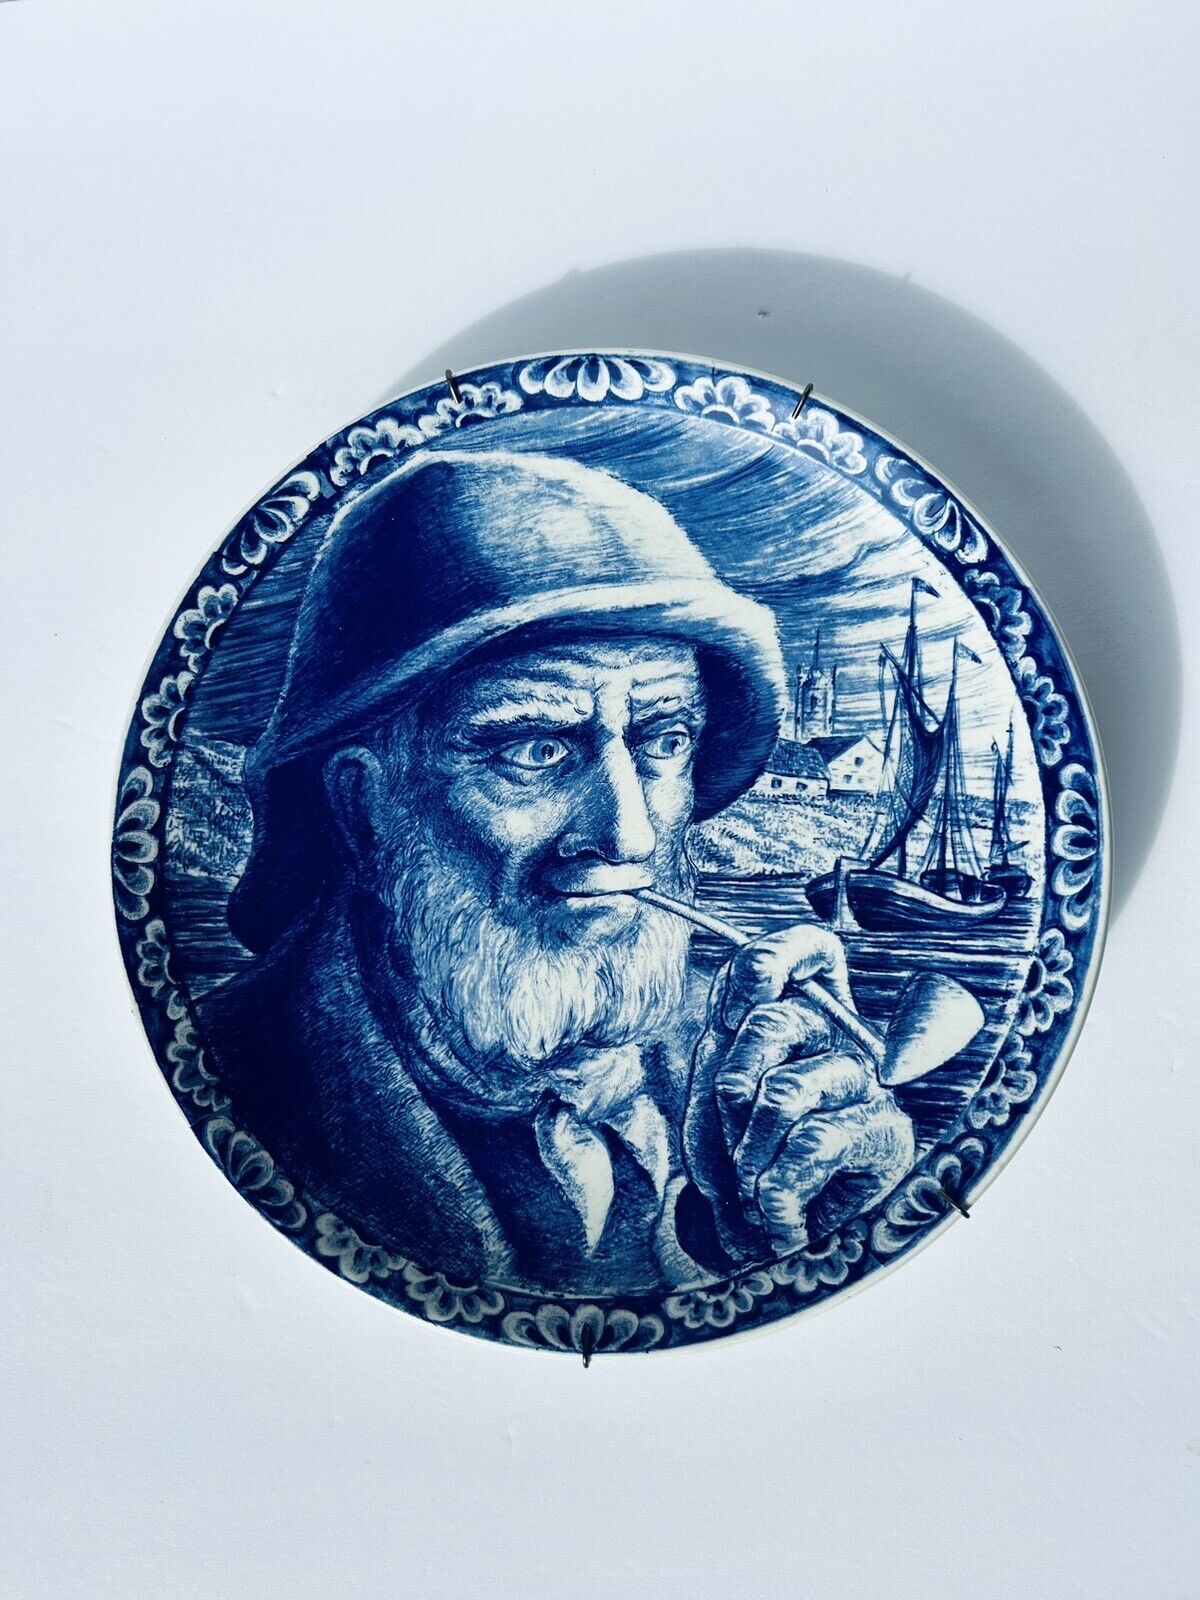 Vintage Delft Ceramic Wall Hanging Charger Plate Sailor And The Horizon 